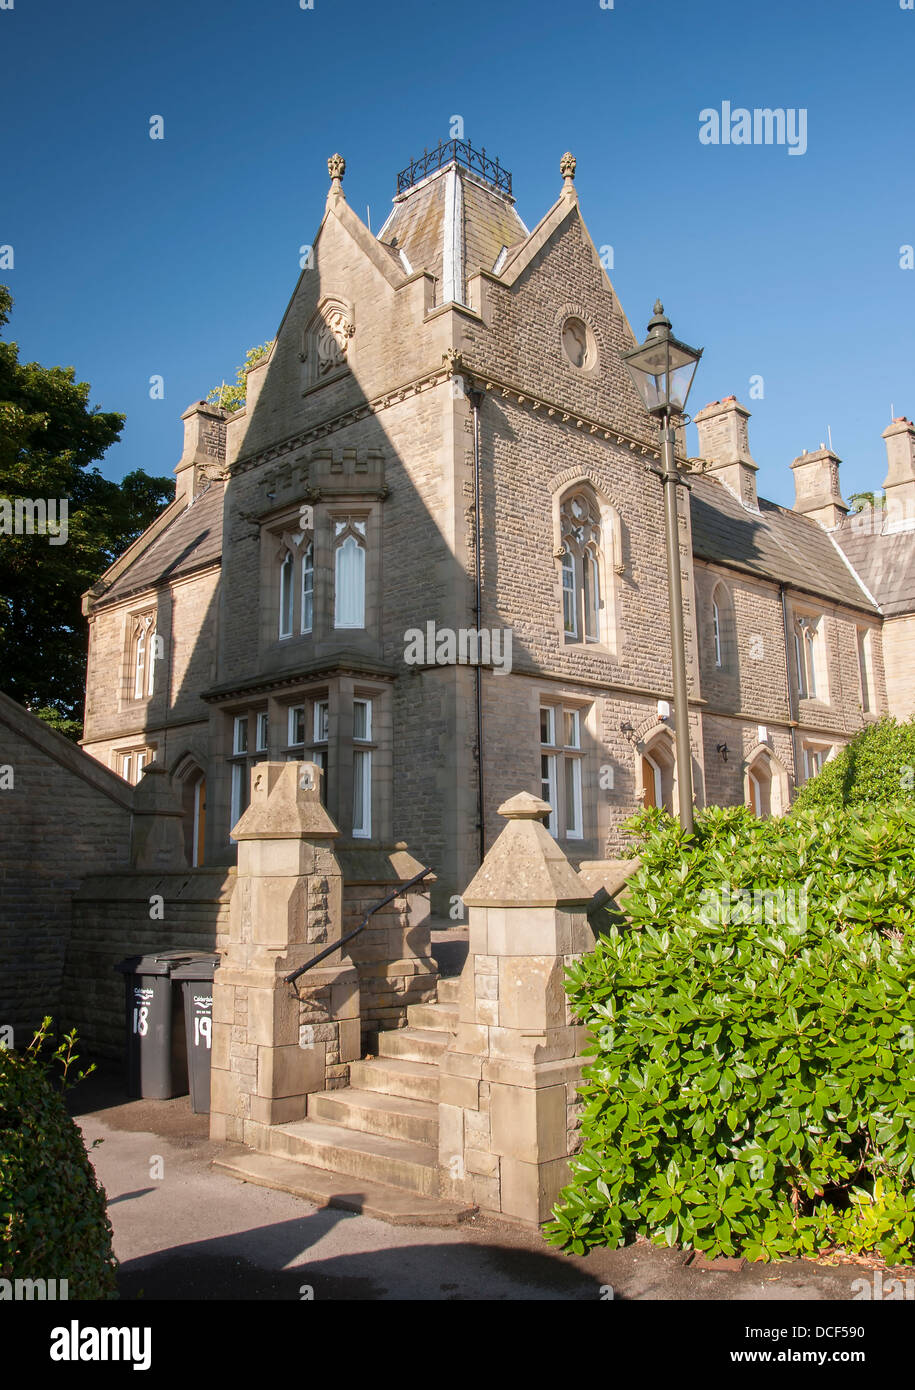 Neo gothic styled victorian almshouses in Halifax, West Yorkshire manufactured from local sandstone Stock Photo